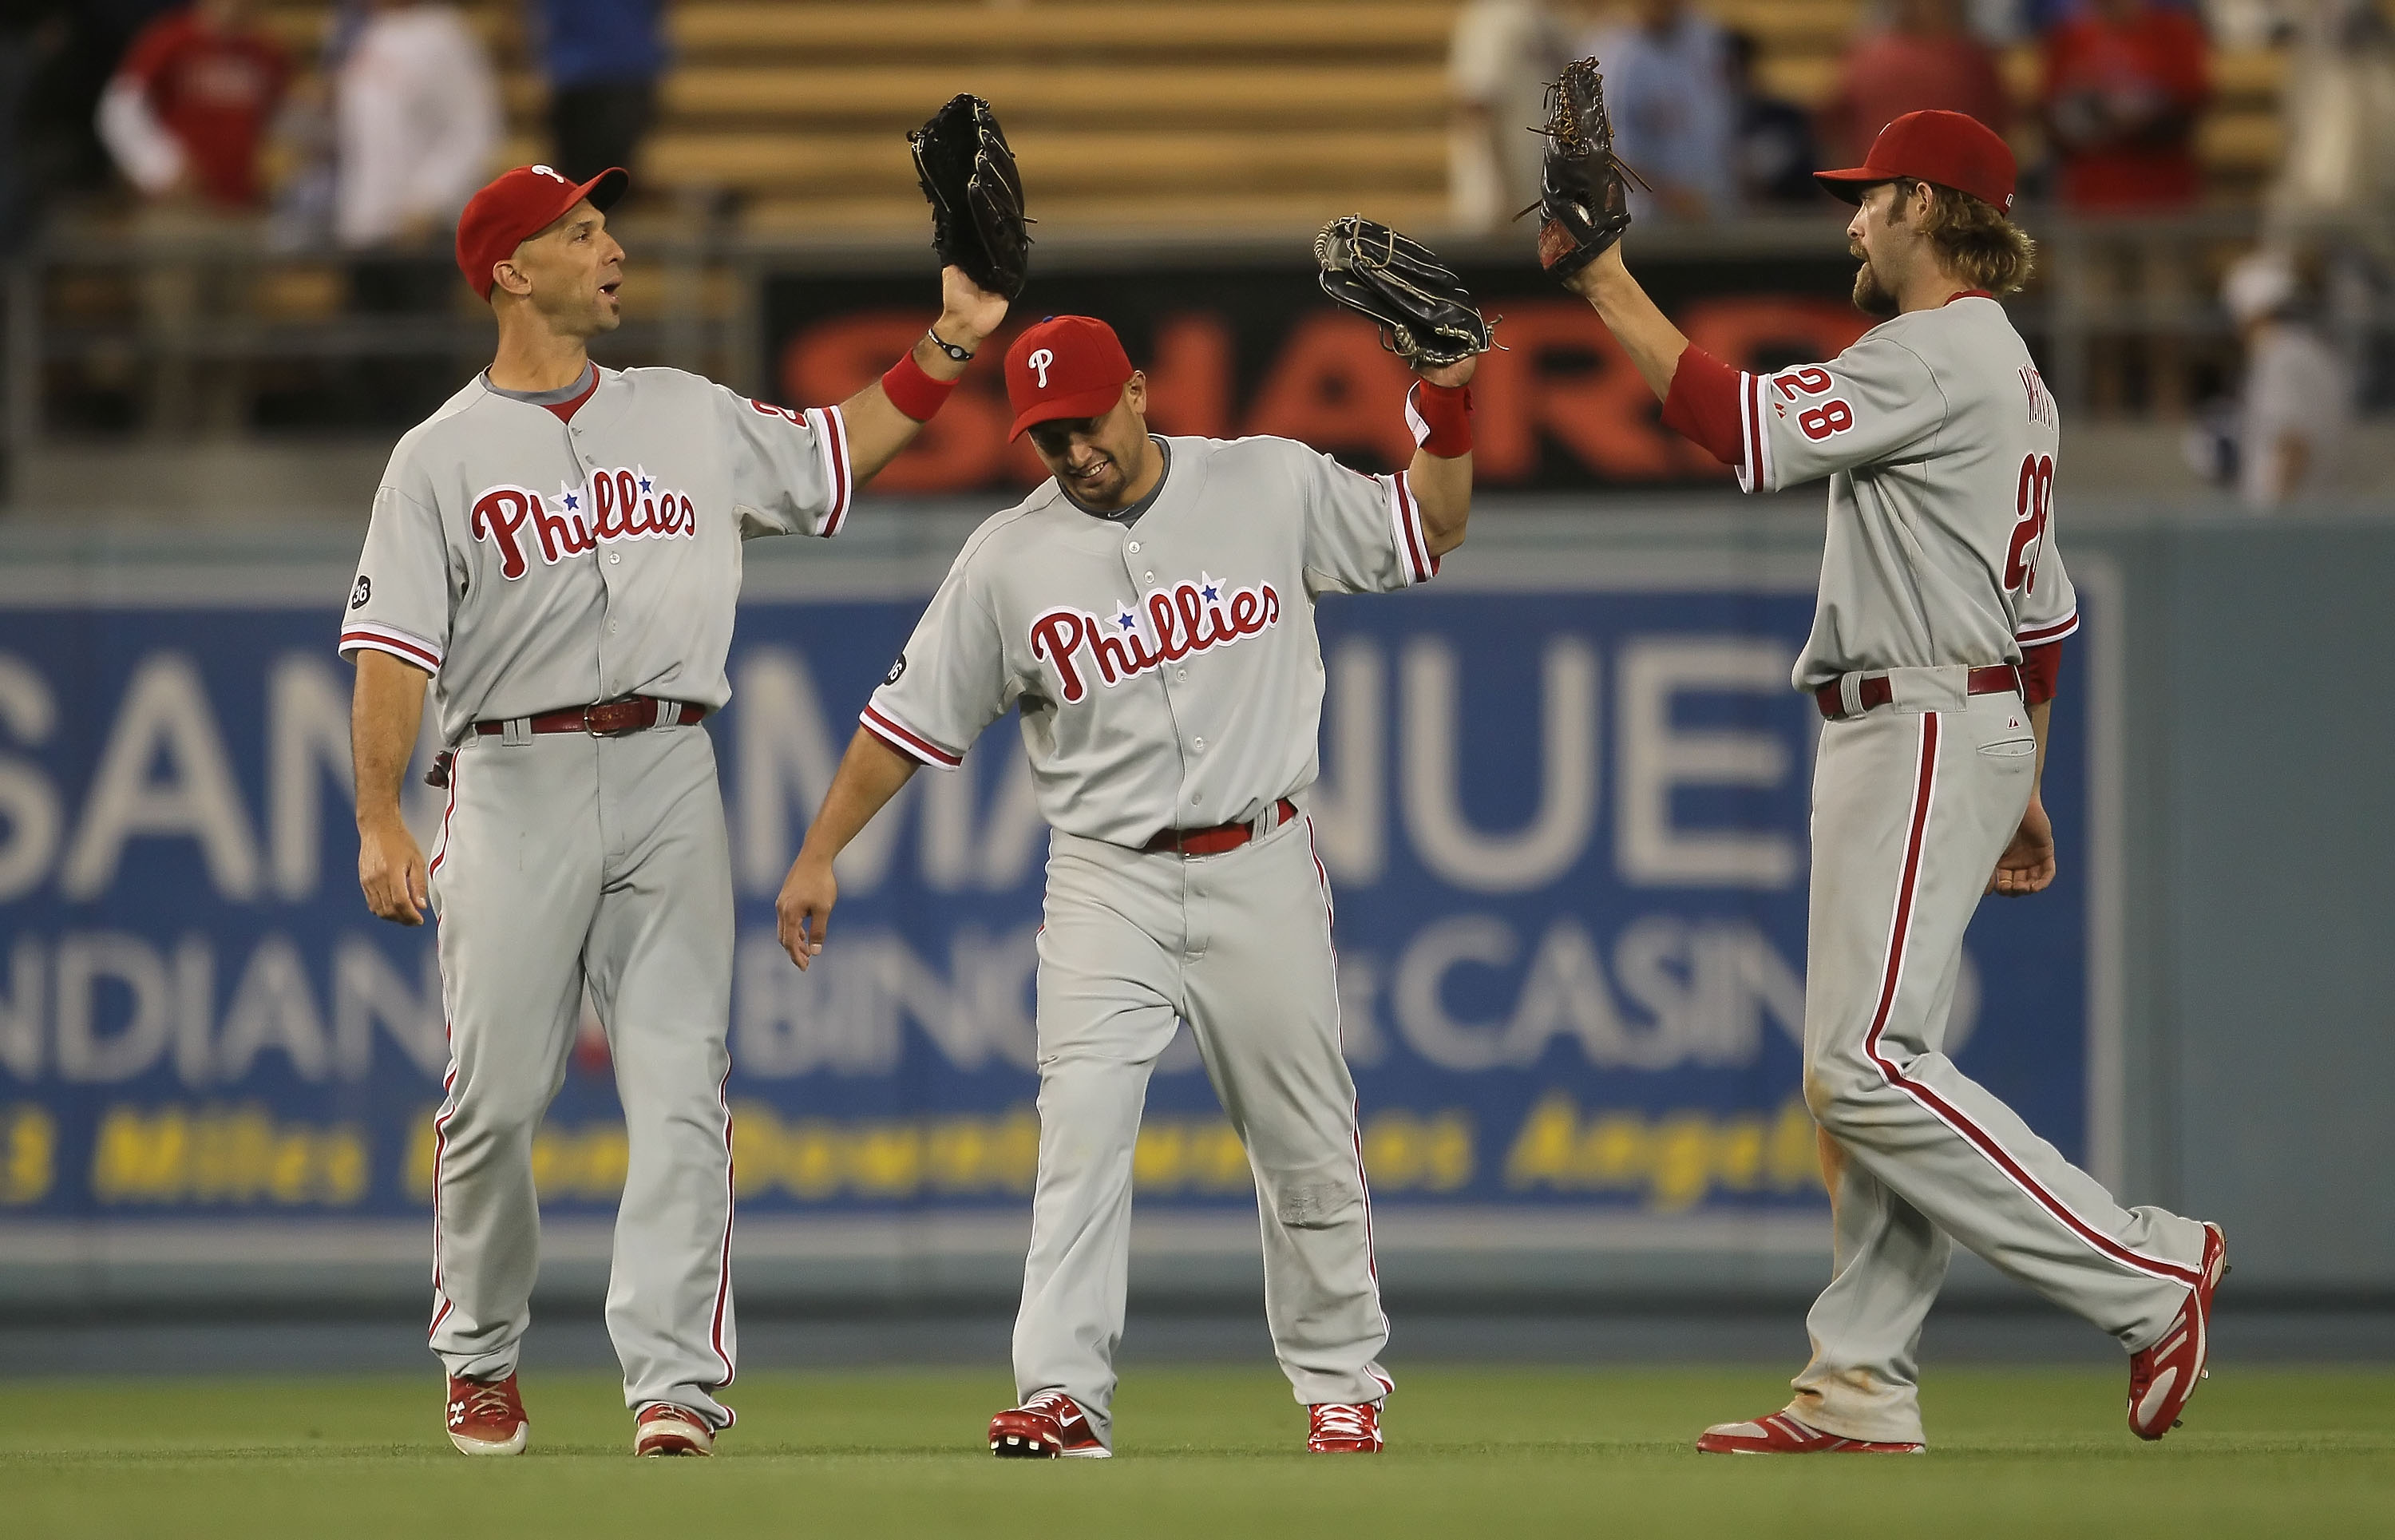 NLCS 2010: Comparing the Phillies and Giants Outfields